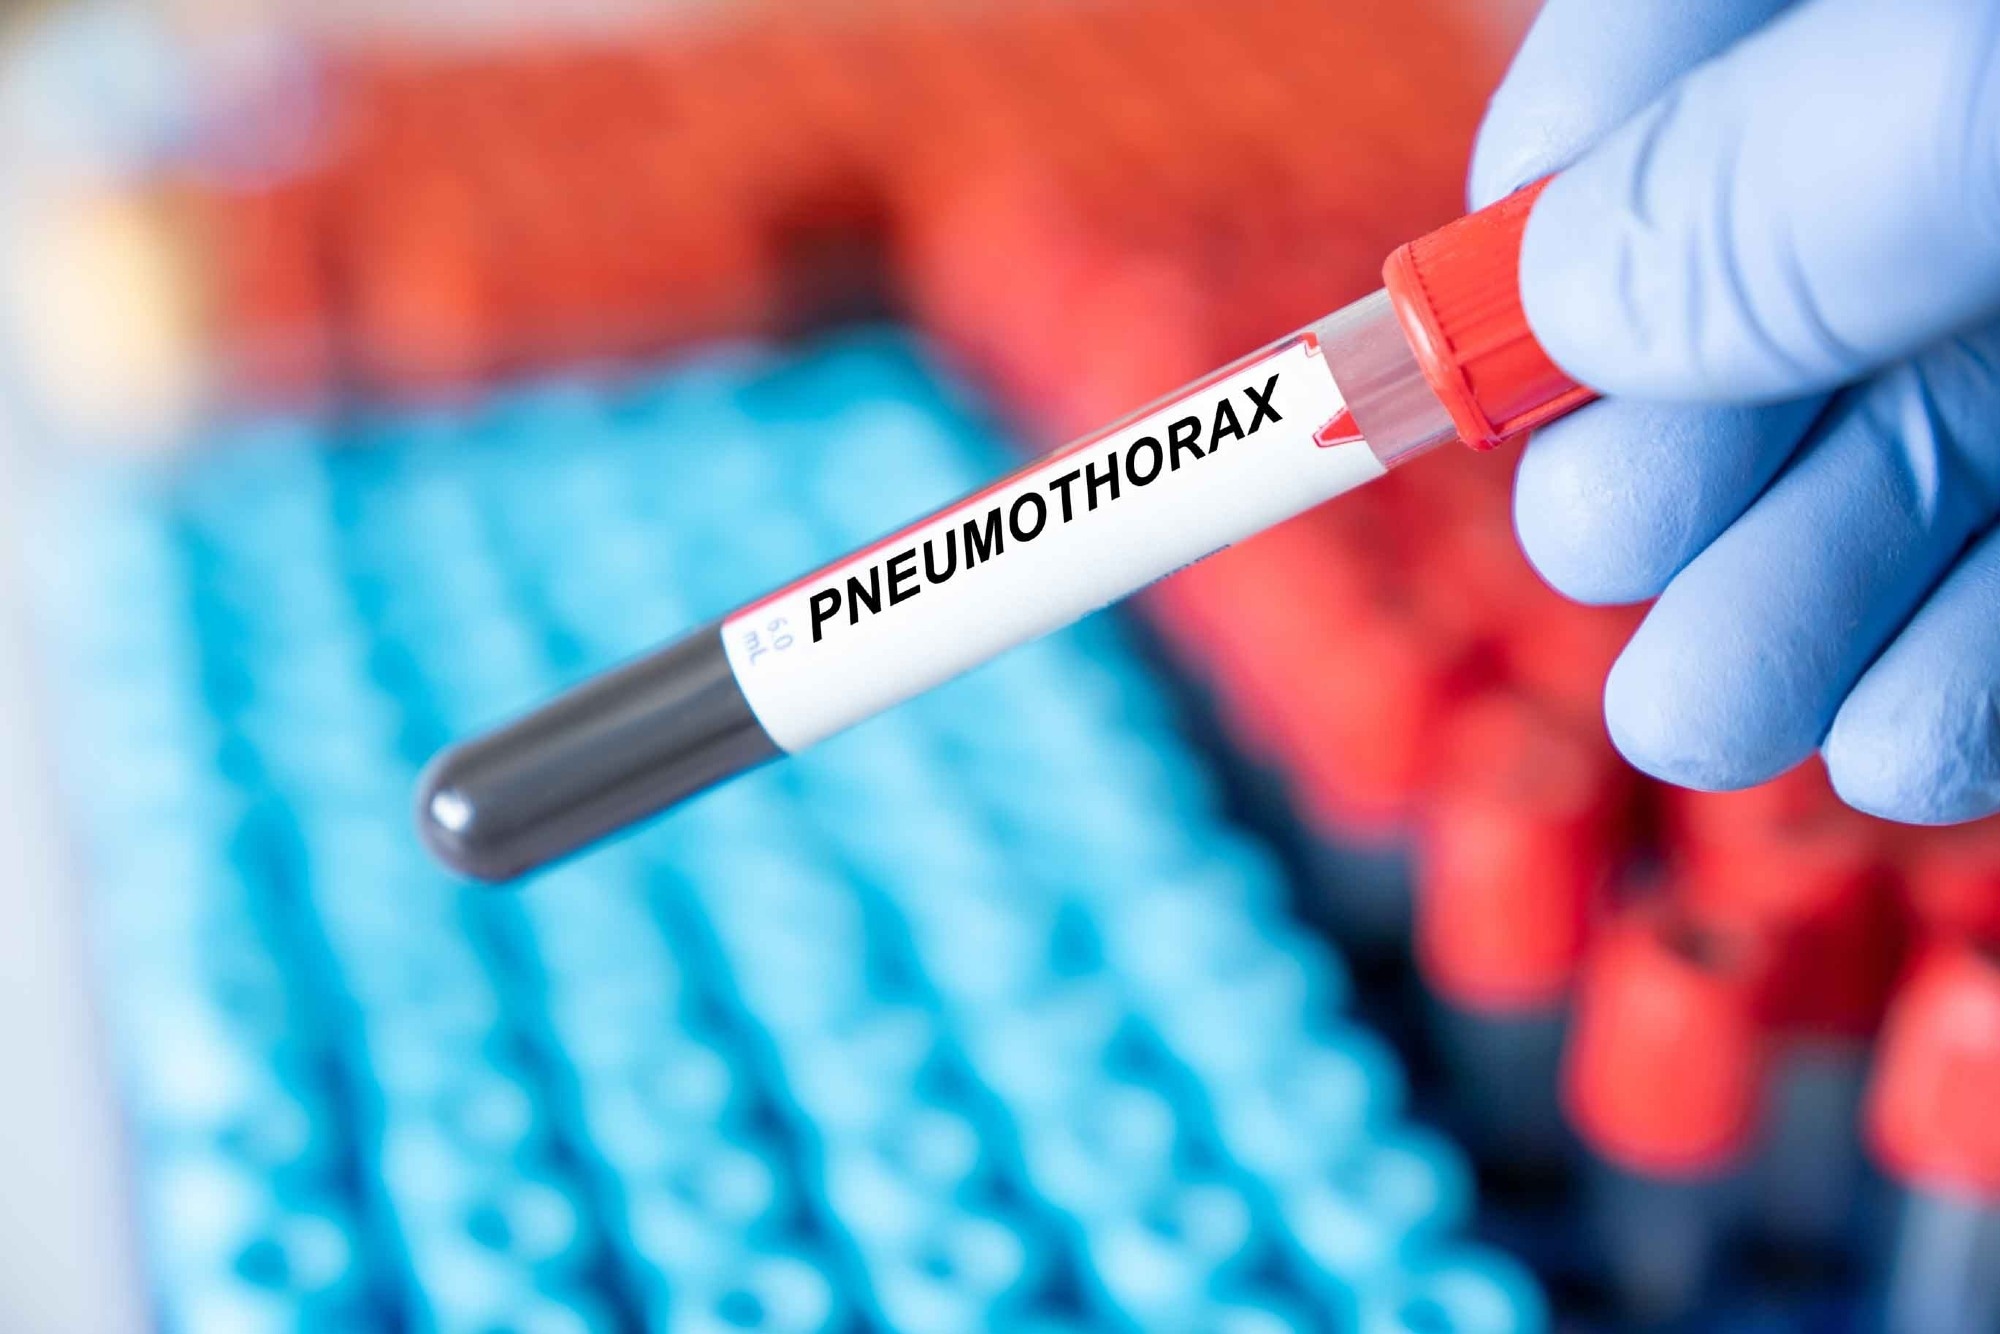 Study: Prevalence and Patient Risk Factors for Pneumothorax in COVID-19 and in Influenza: A Nationwide Comparative Analysis. Image Credit: luchschenF/Shutterstock.com